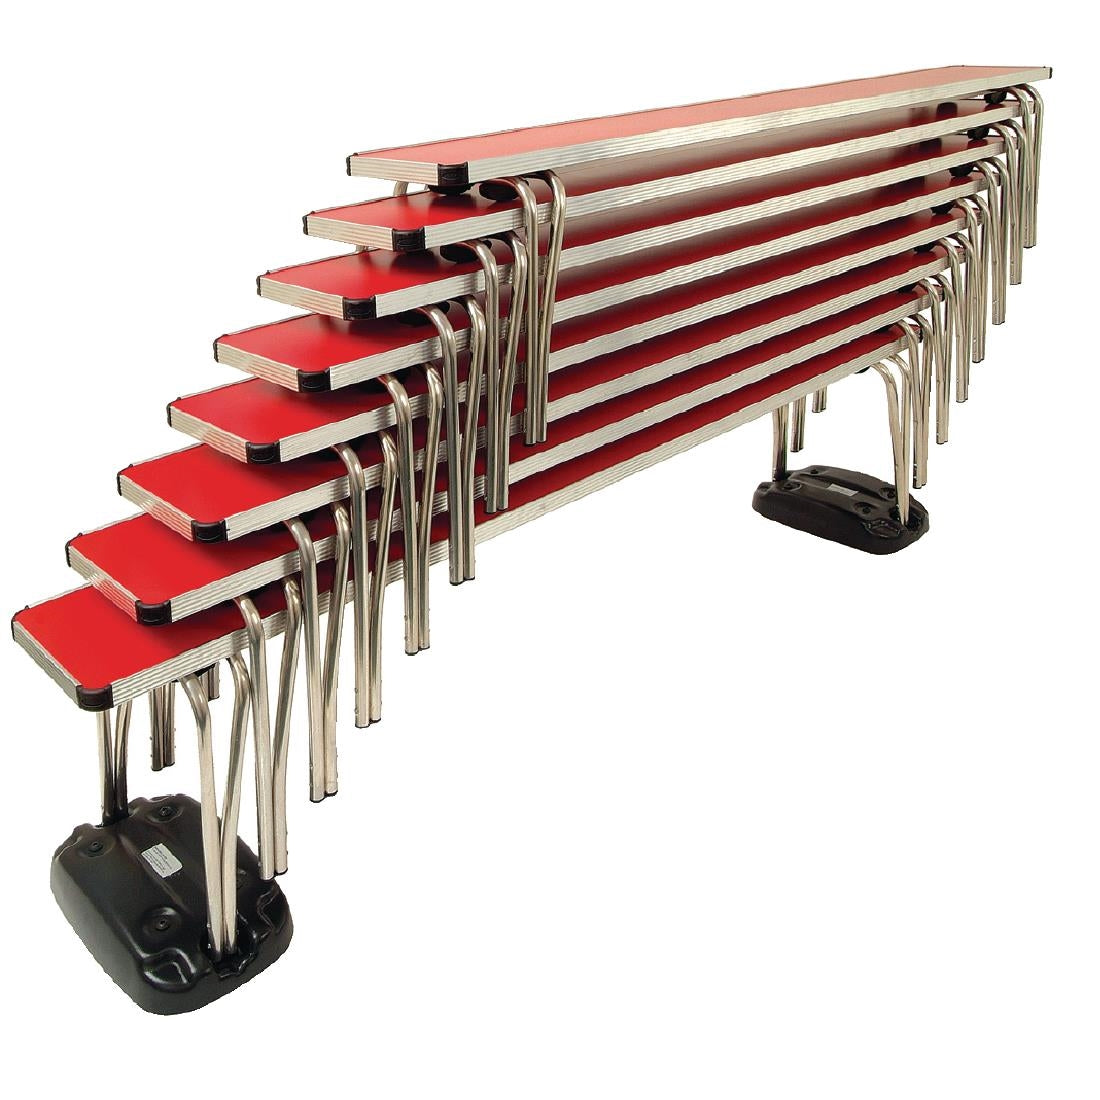 DM950 Gopak Contour Stacking Bench Red  6ft JD Catering Equipment Solutions Ltd